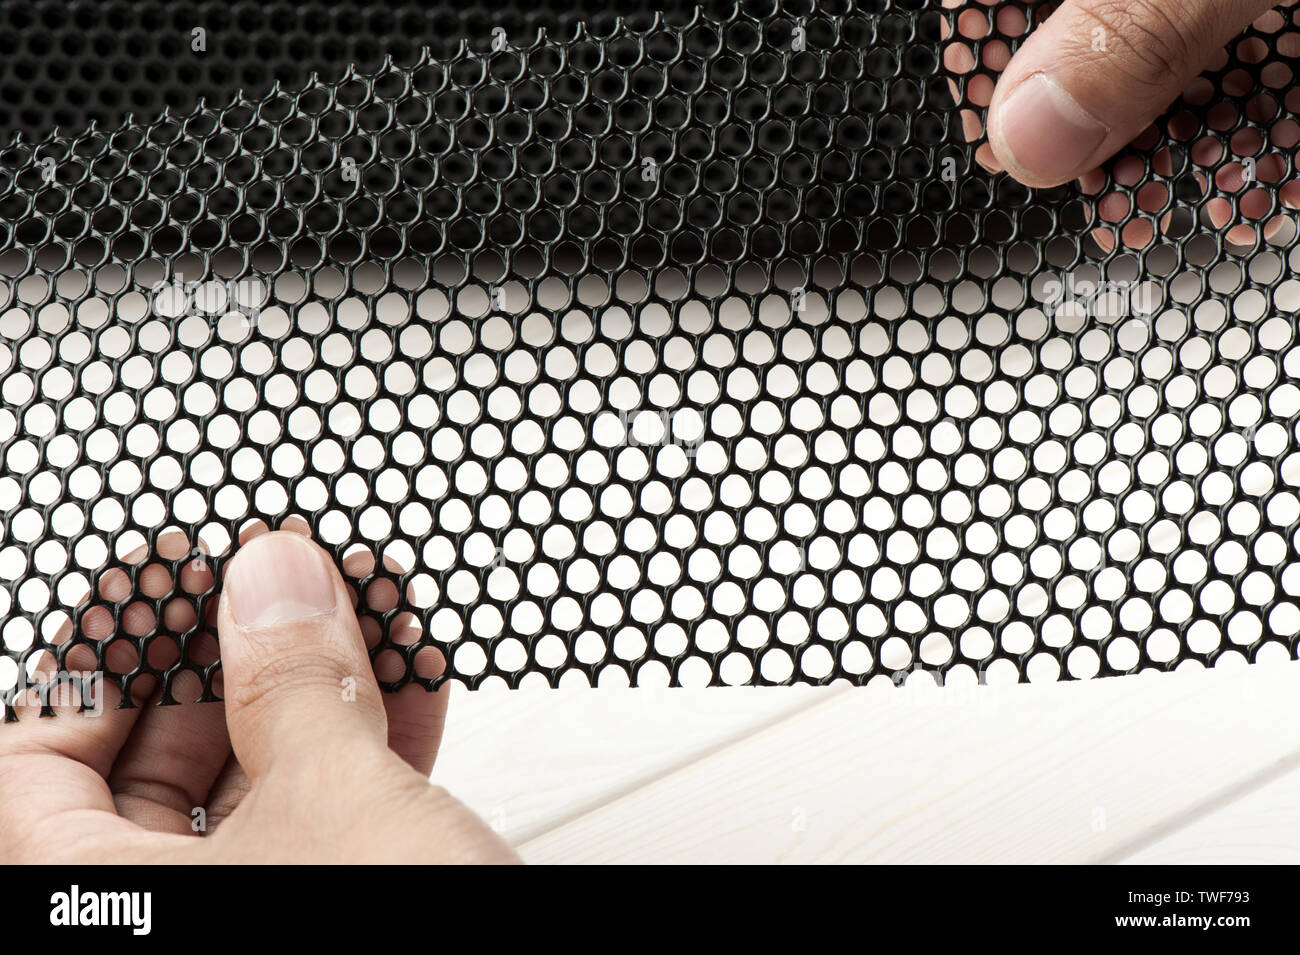 Mesh Net Plastic Texture Stock Photo, Picture and Royalty Free Image. Image  56450983.